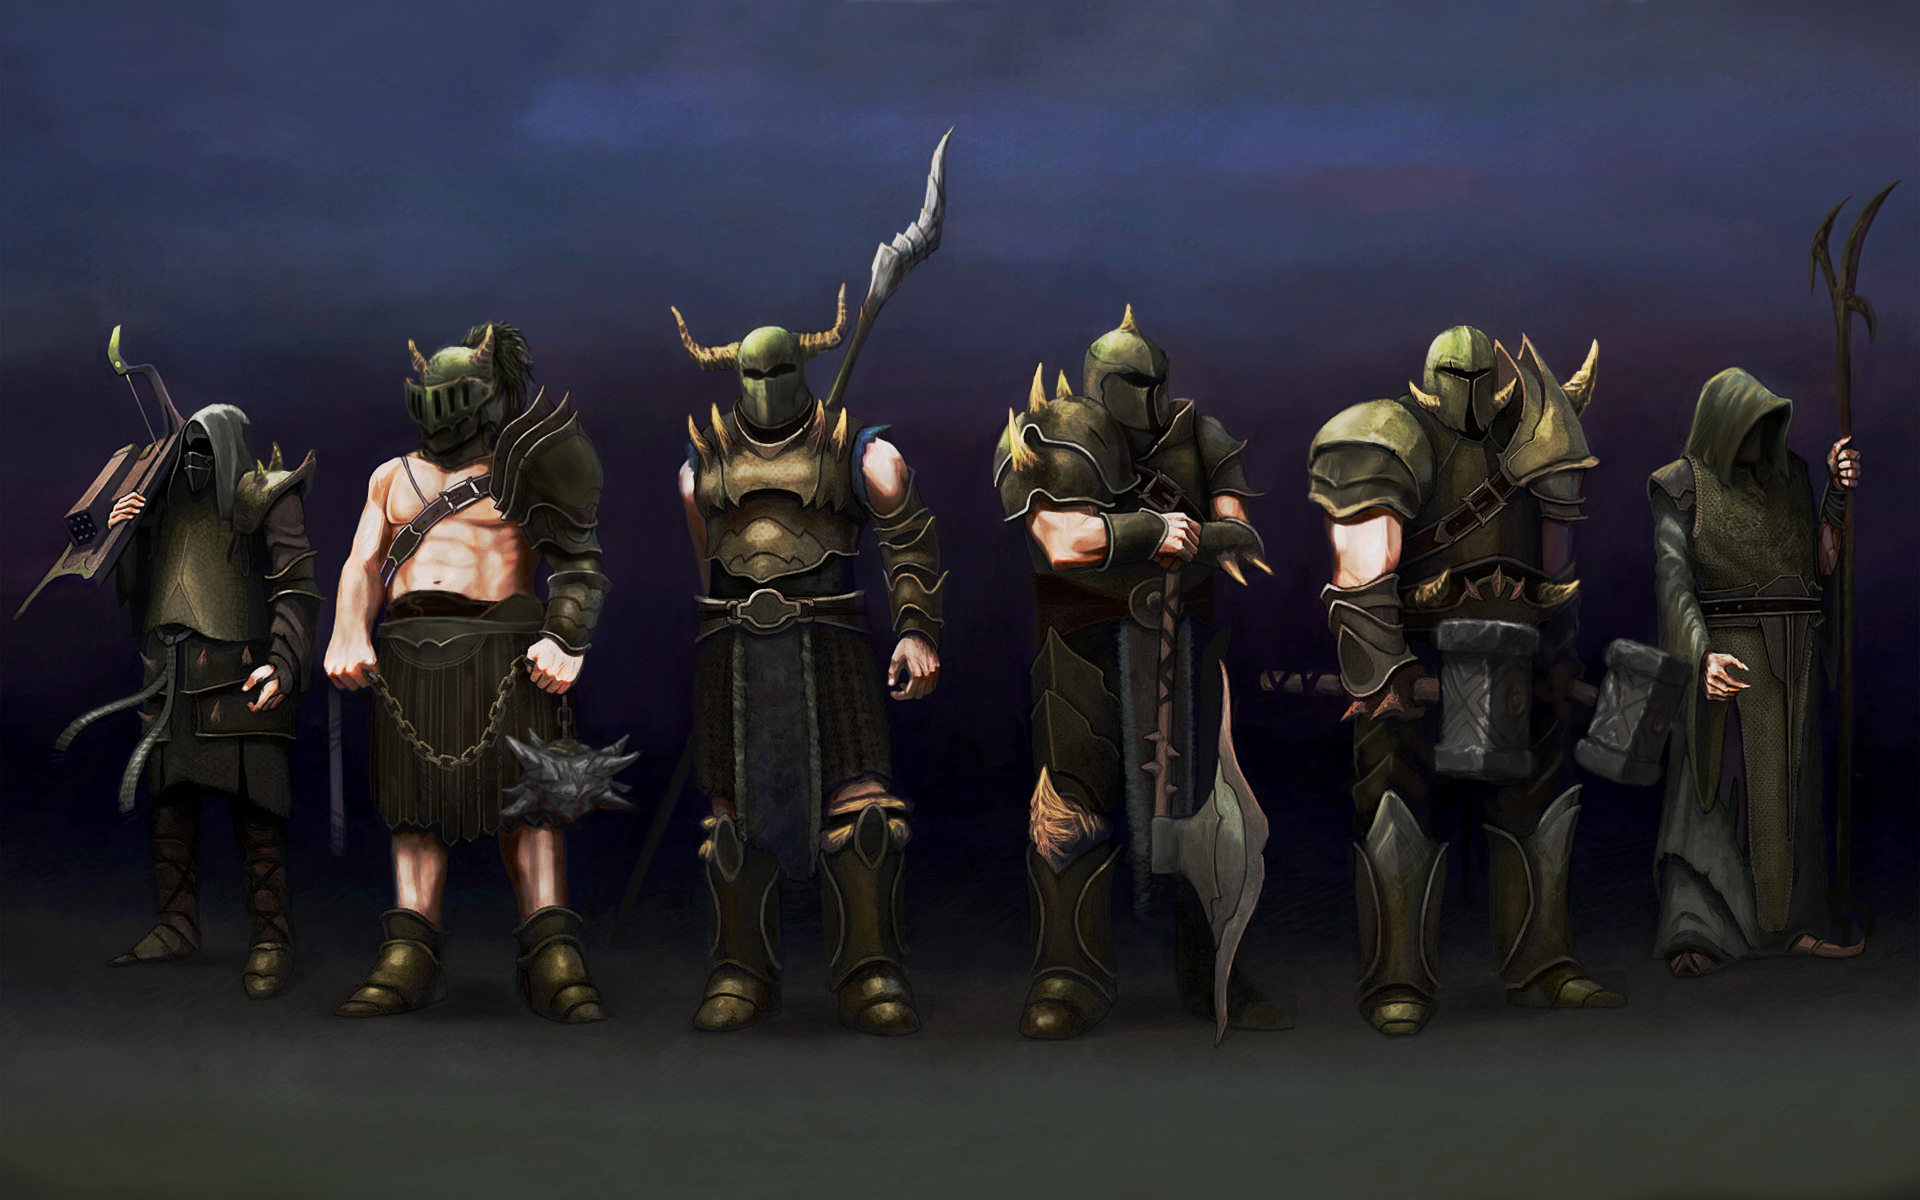 A Bit More Accurate Wallpaper Of The Barrows Bros 2007scape